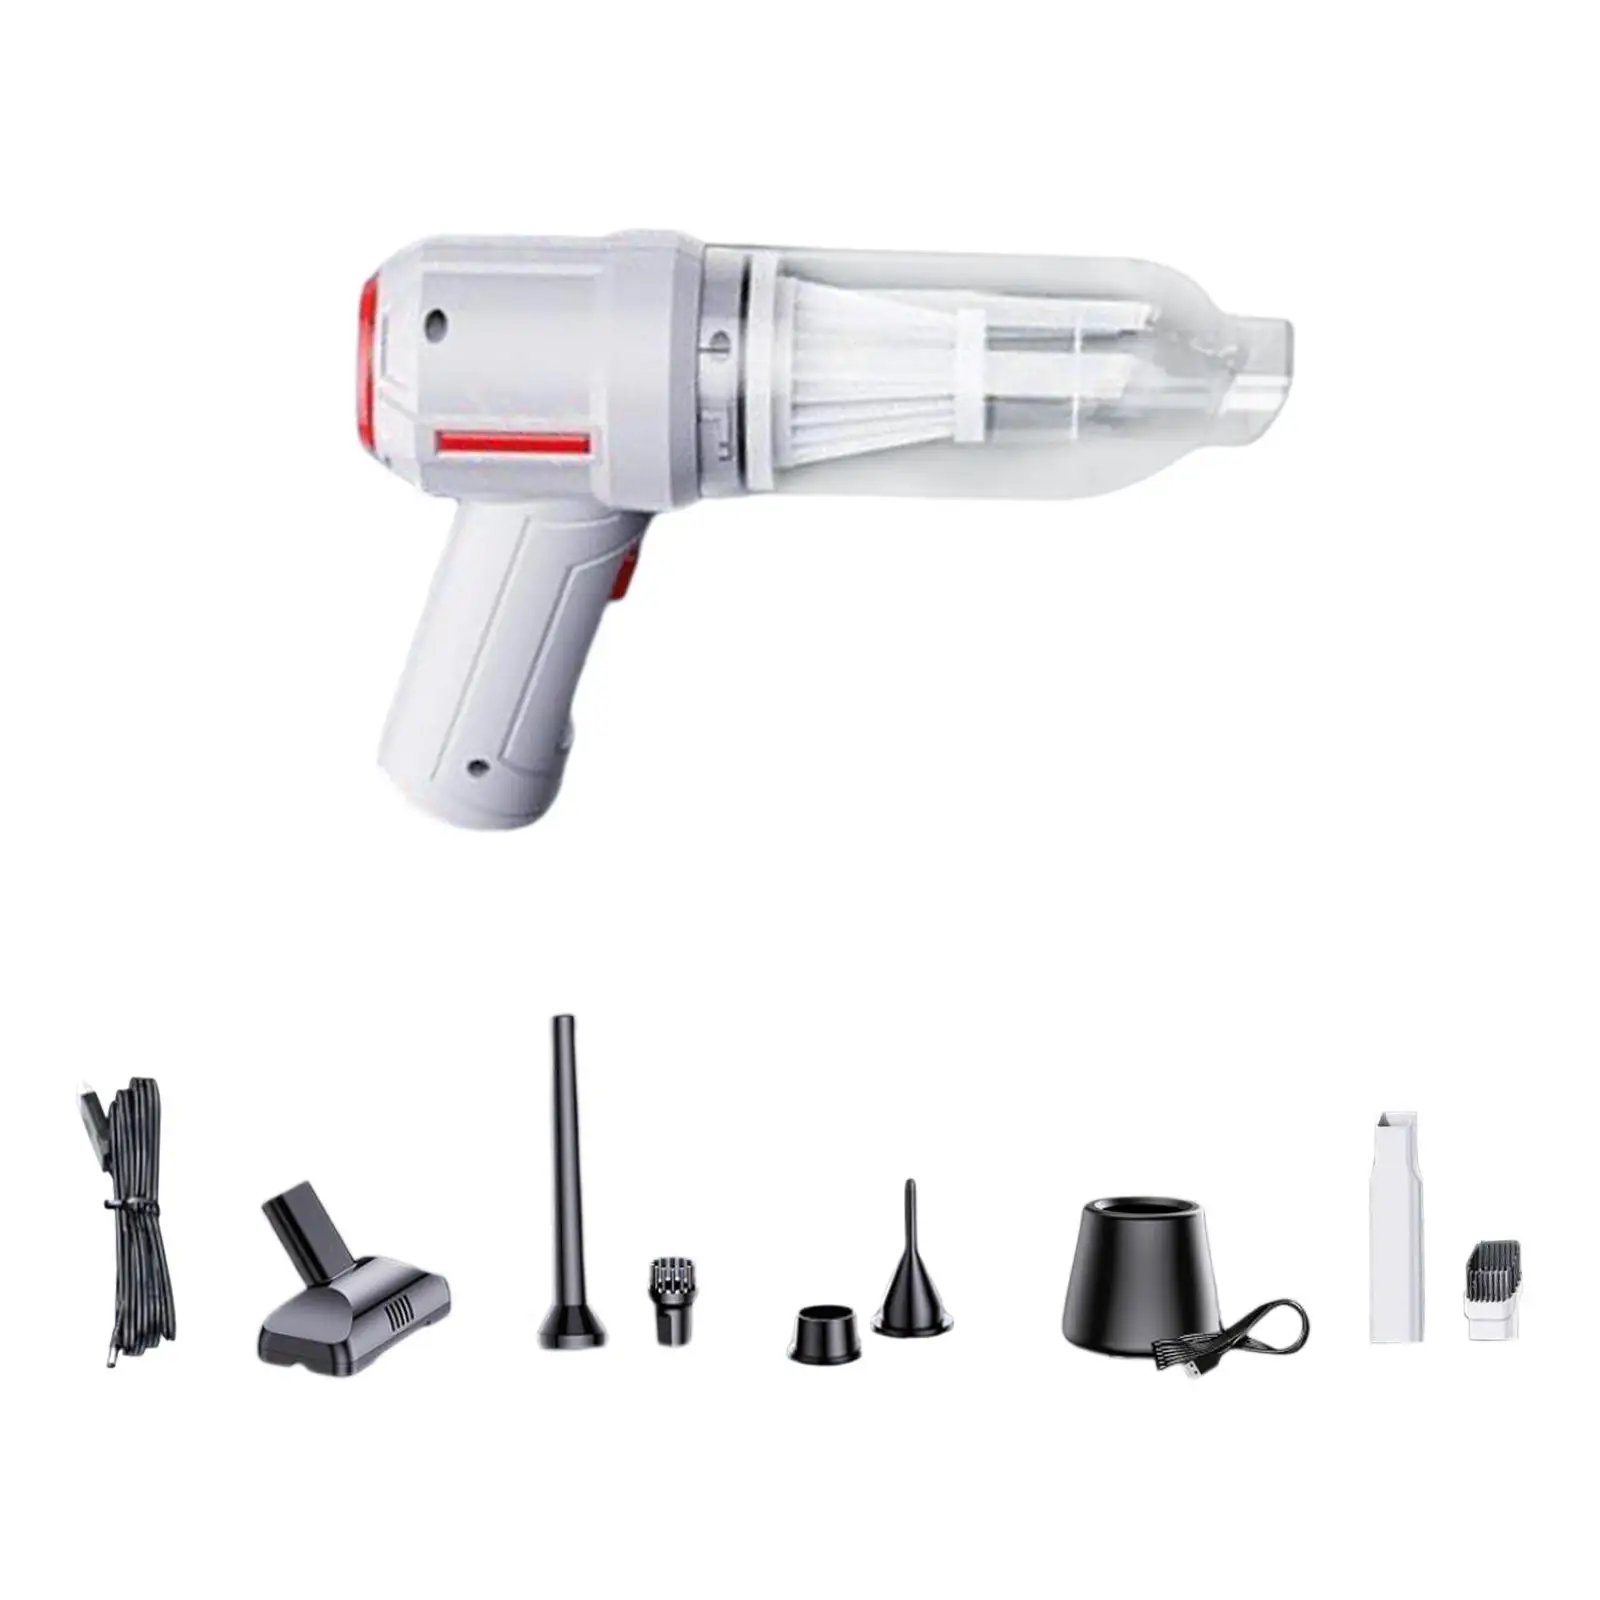 Cordless Handheld Vacuum Cleaner USB Charging with HEPA Filtration Washable